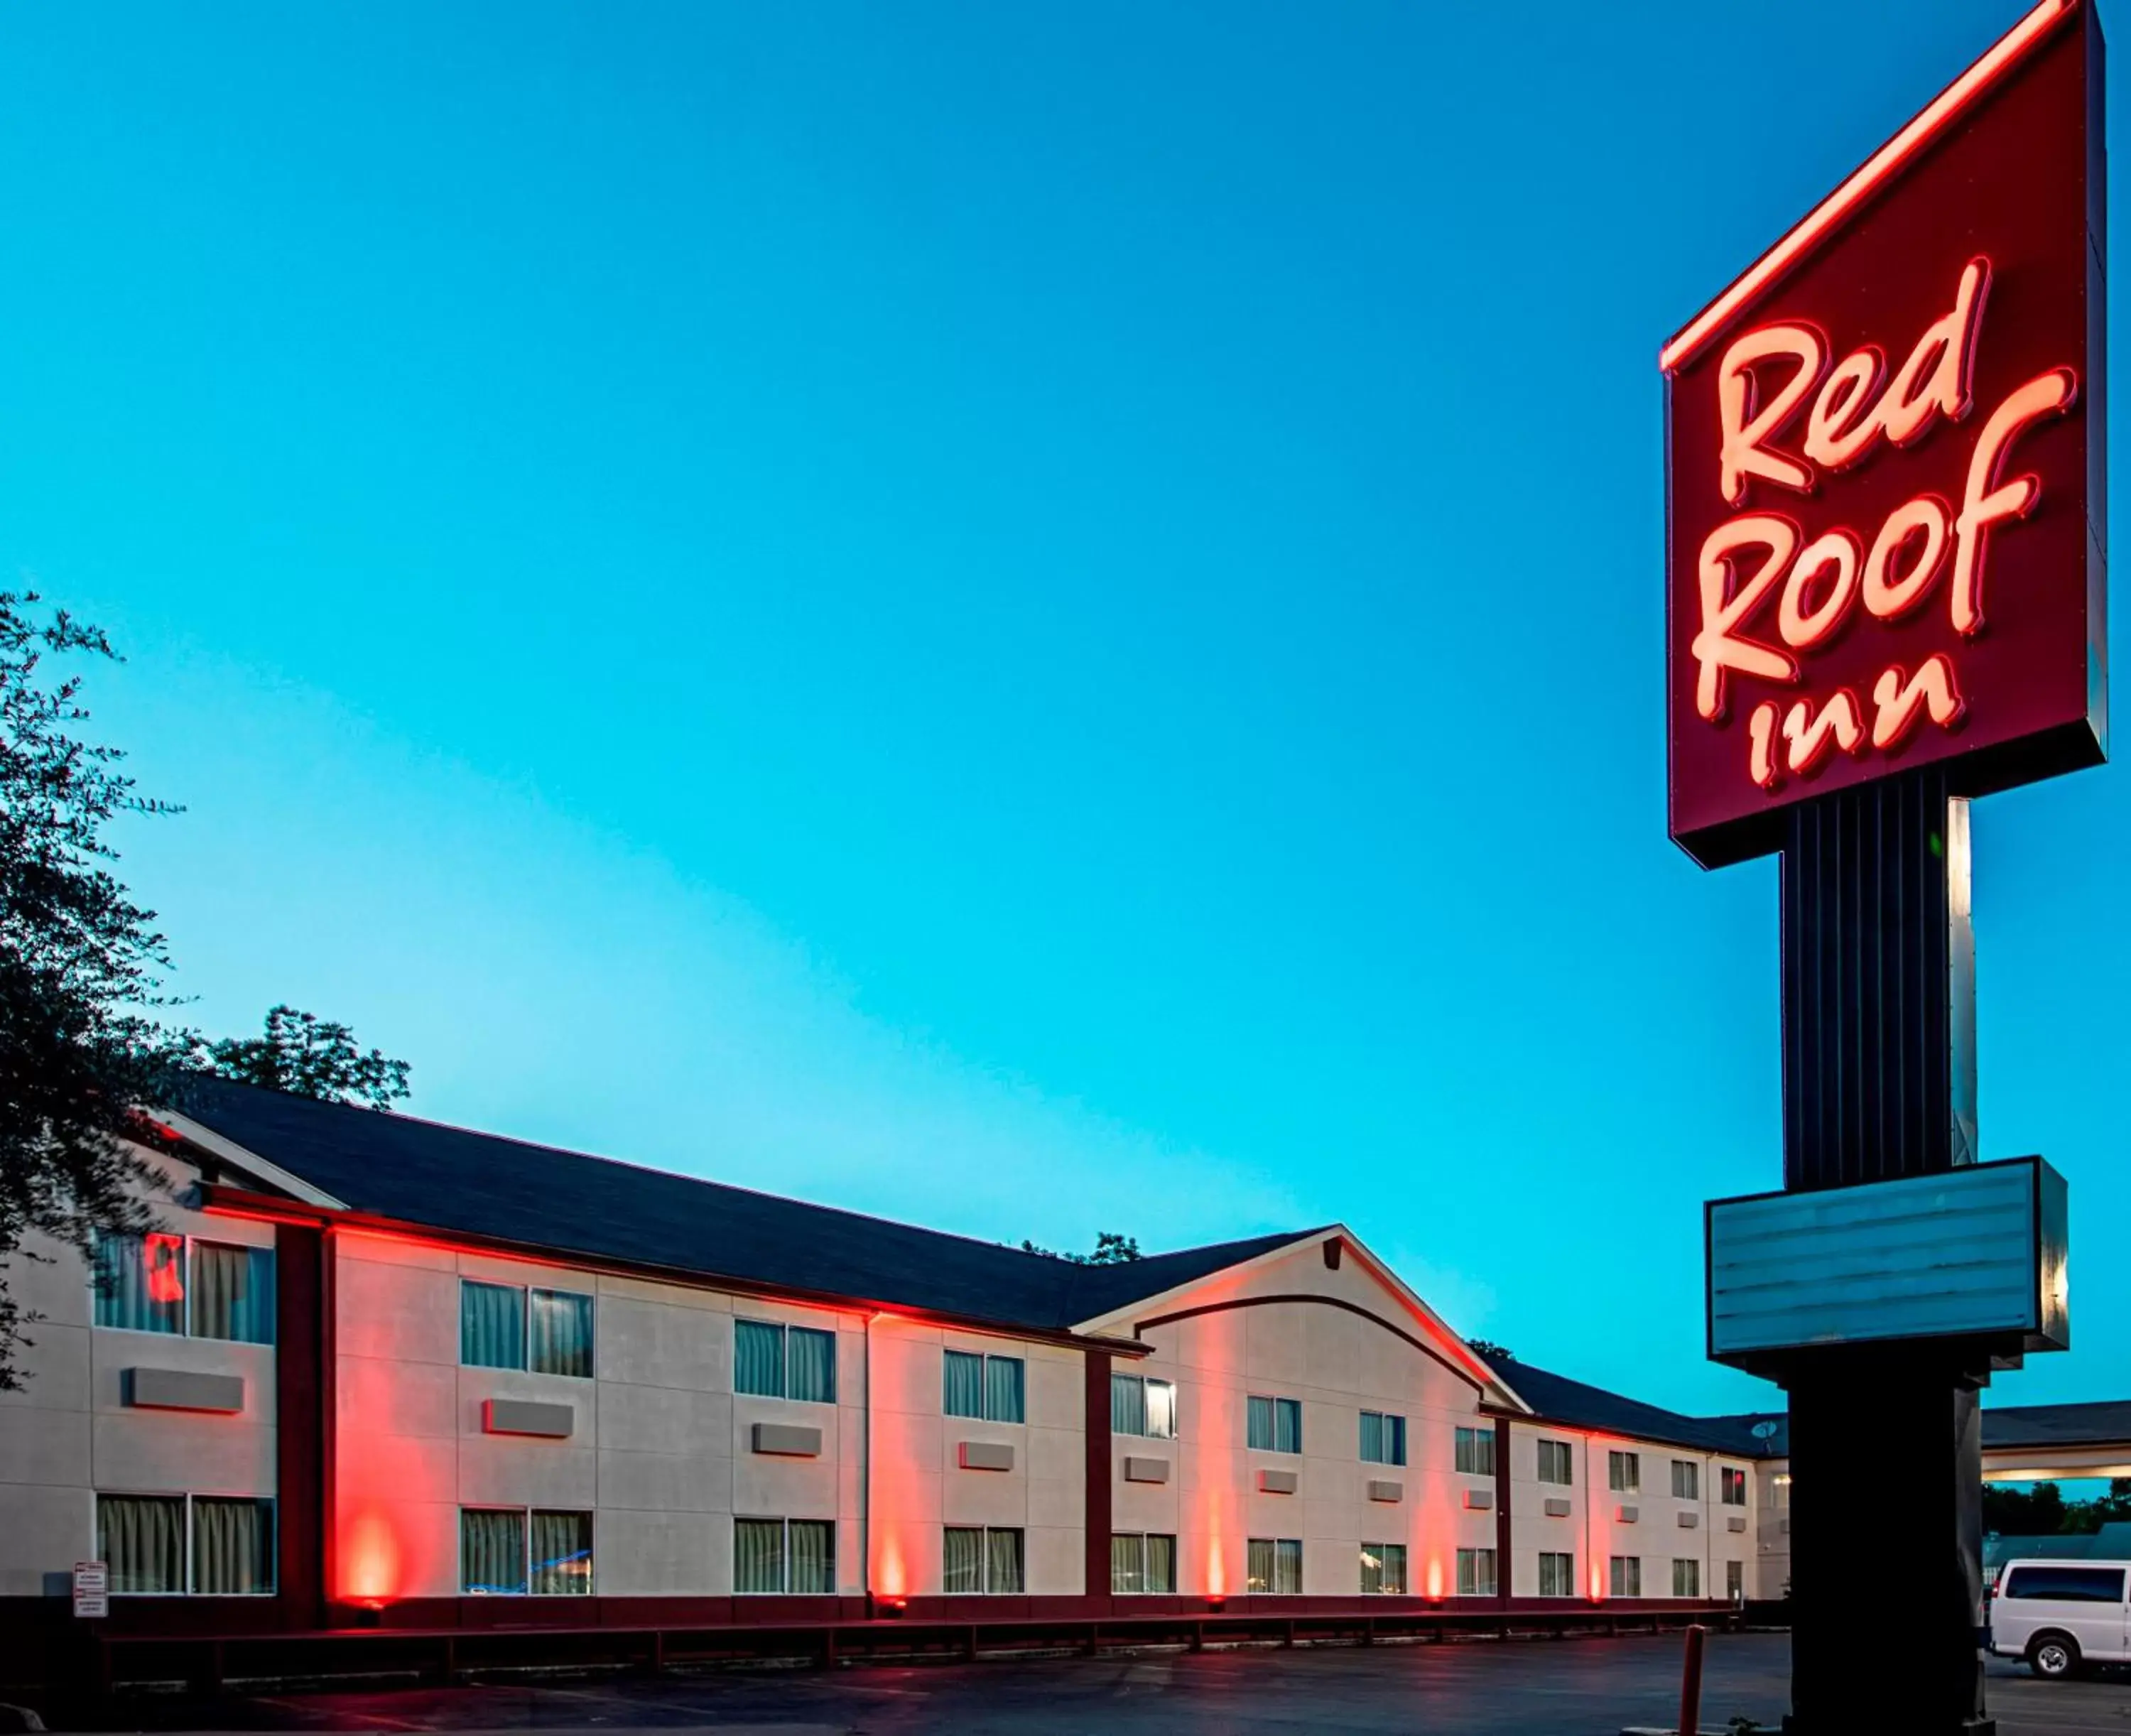 Property Building in Red Roof Inn San Marcos